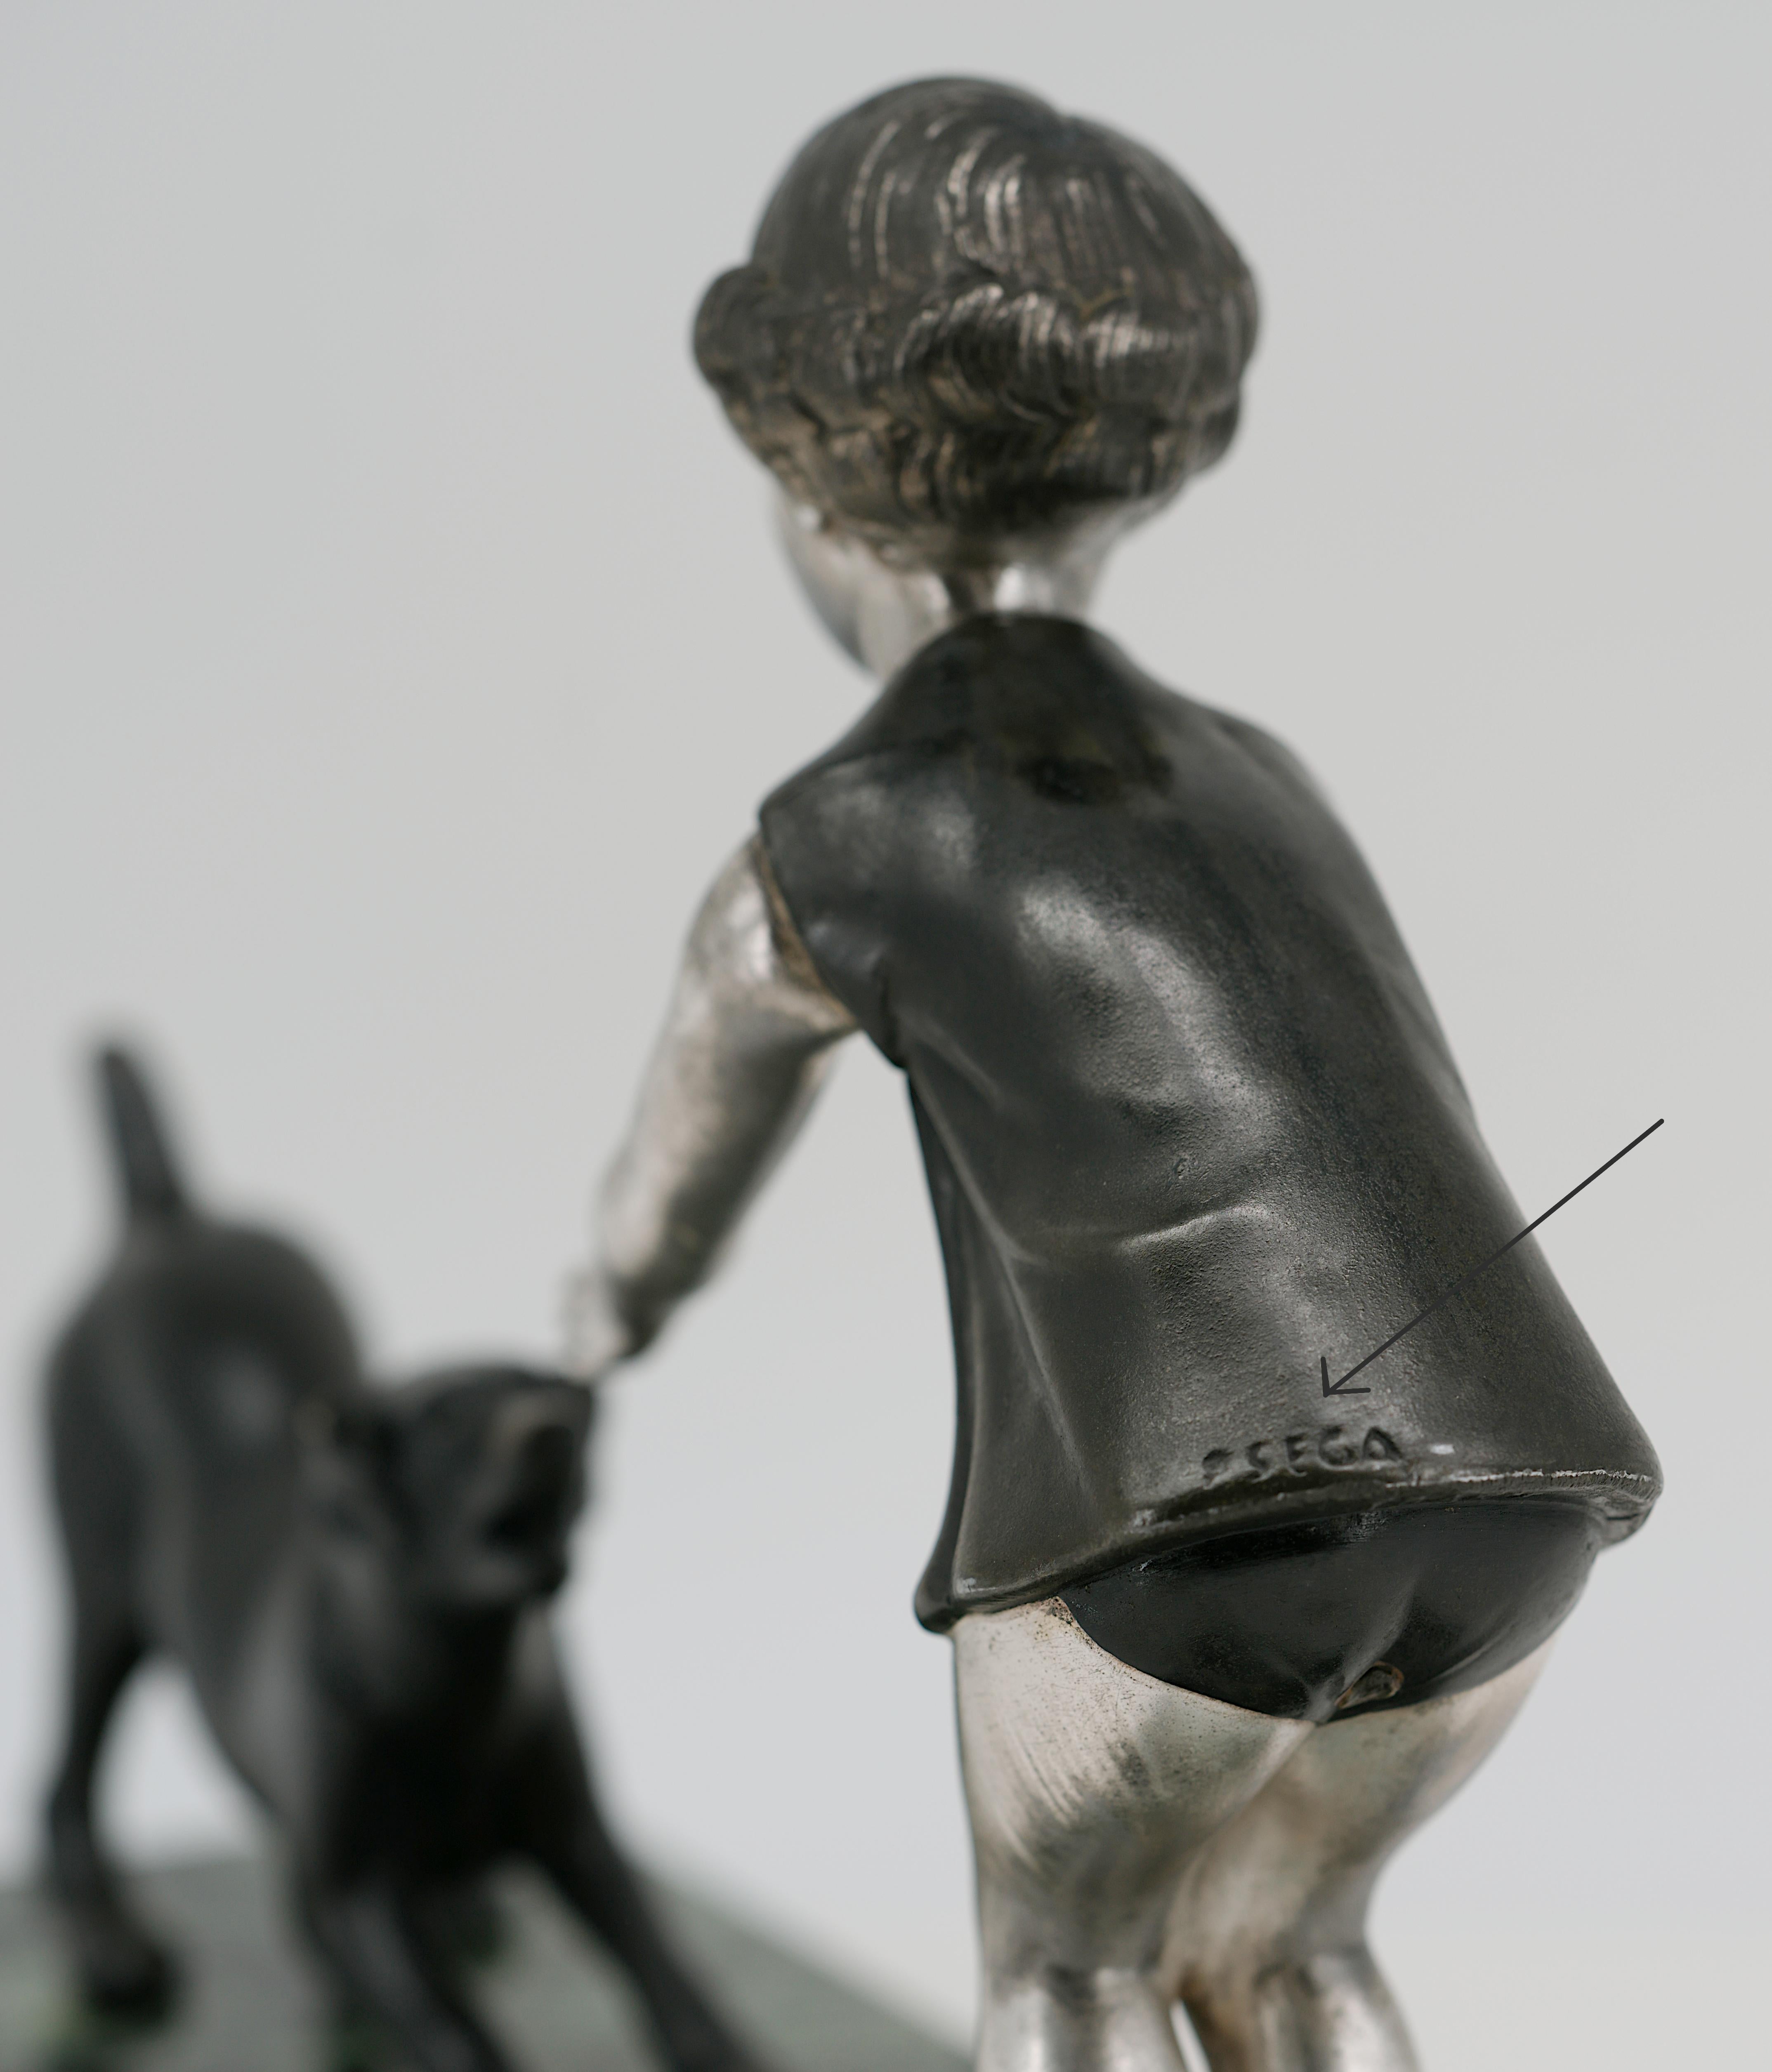 Mid-20th Century French Art Deco Young Girl & Dog Sculpture by P.Sega, 1930s For Sale